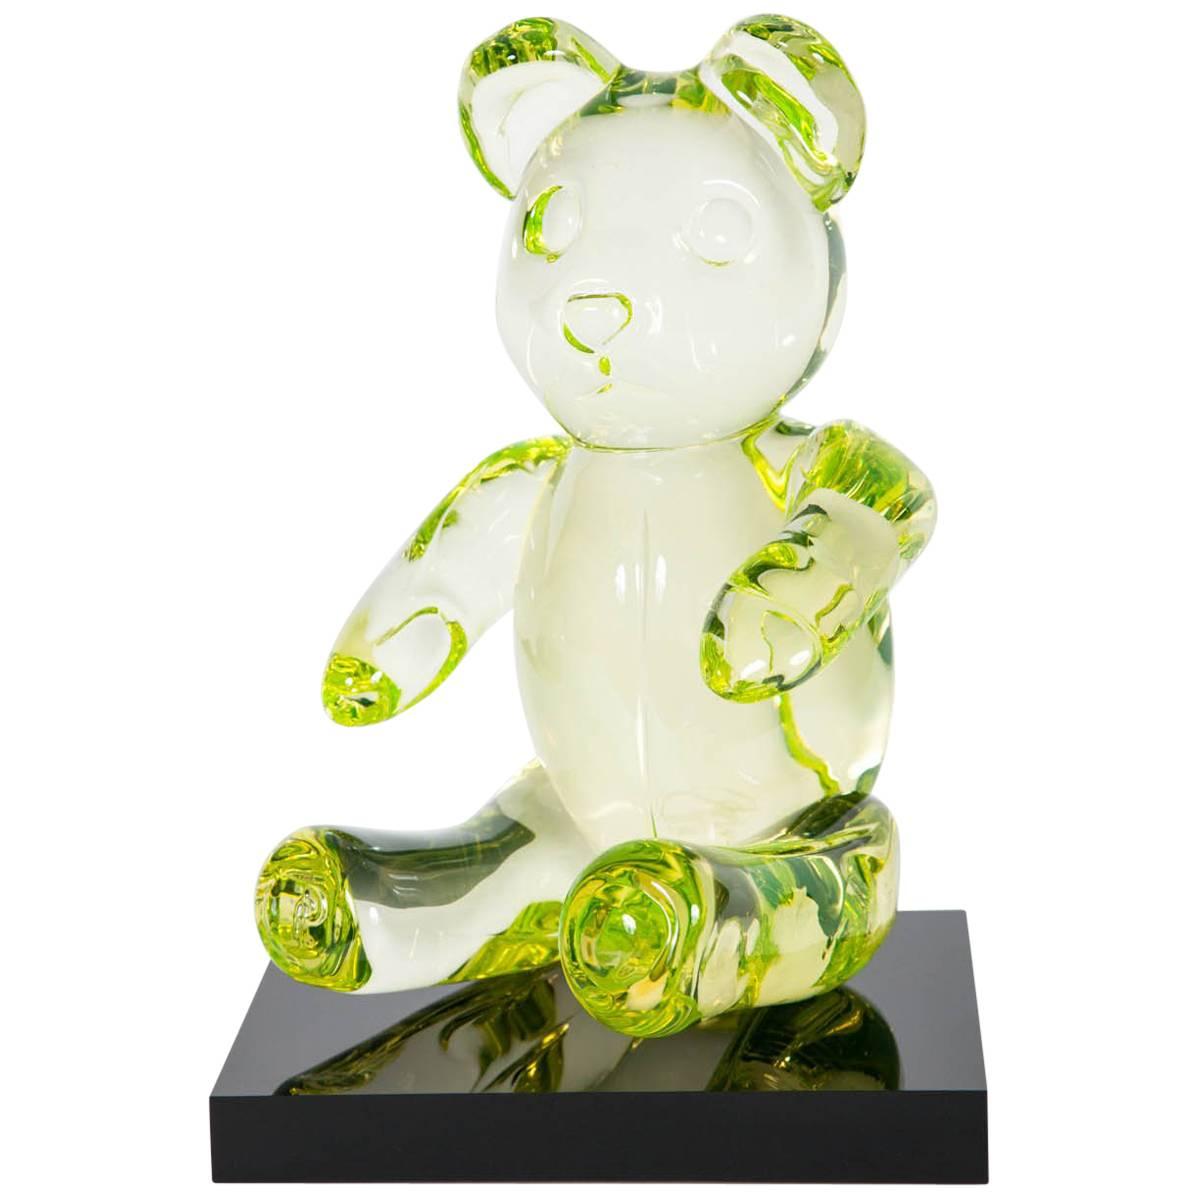 Bear, a unique lime green glass sculpted animal figurine by Elliot Walker